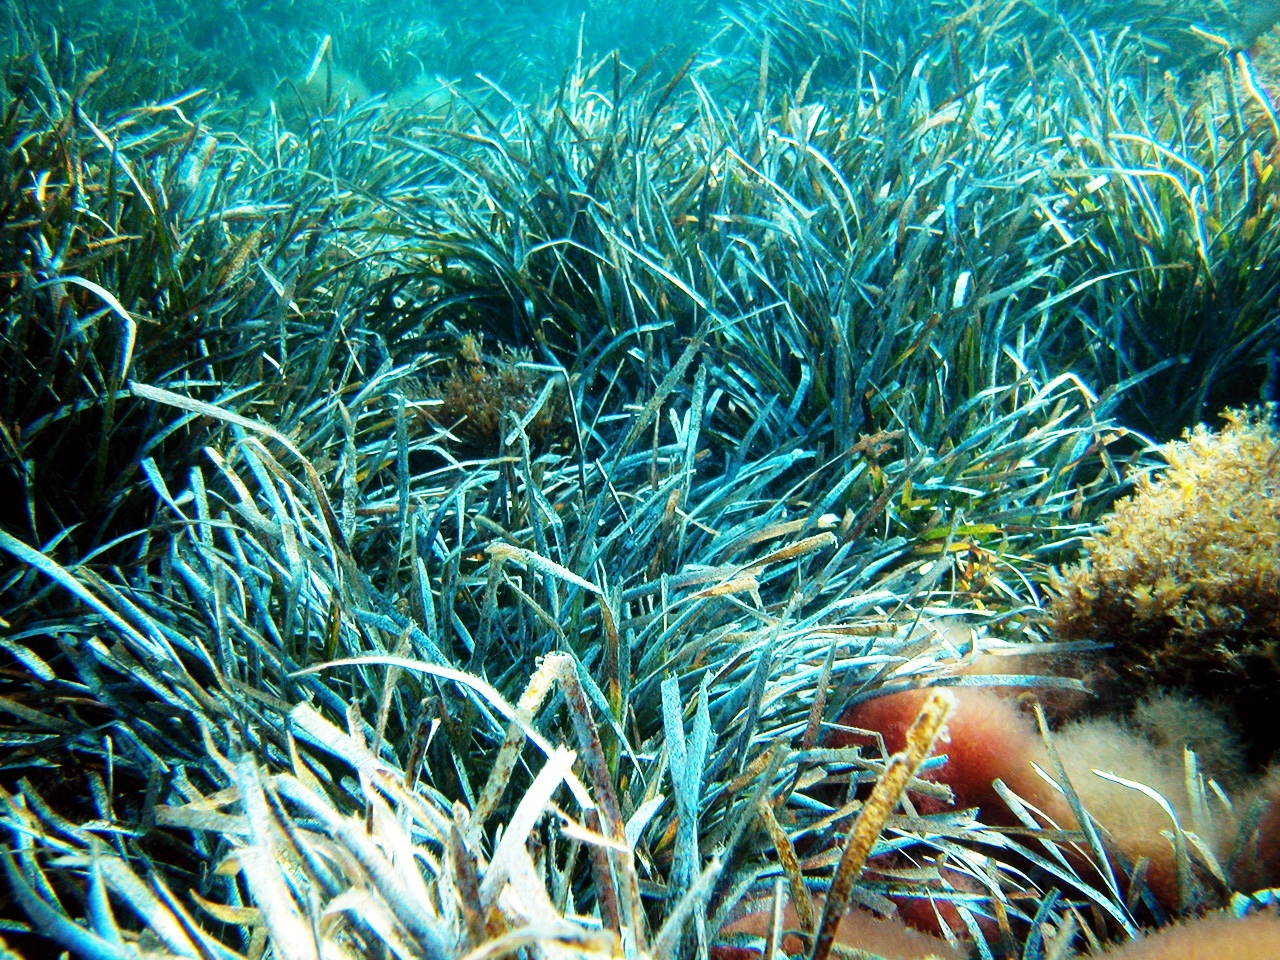 Posidonia oceanica is a seagrass species that is endemic to the Mediterranean Sea.